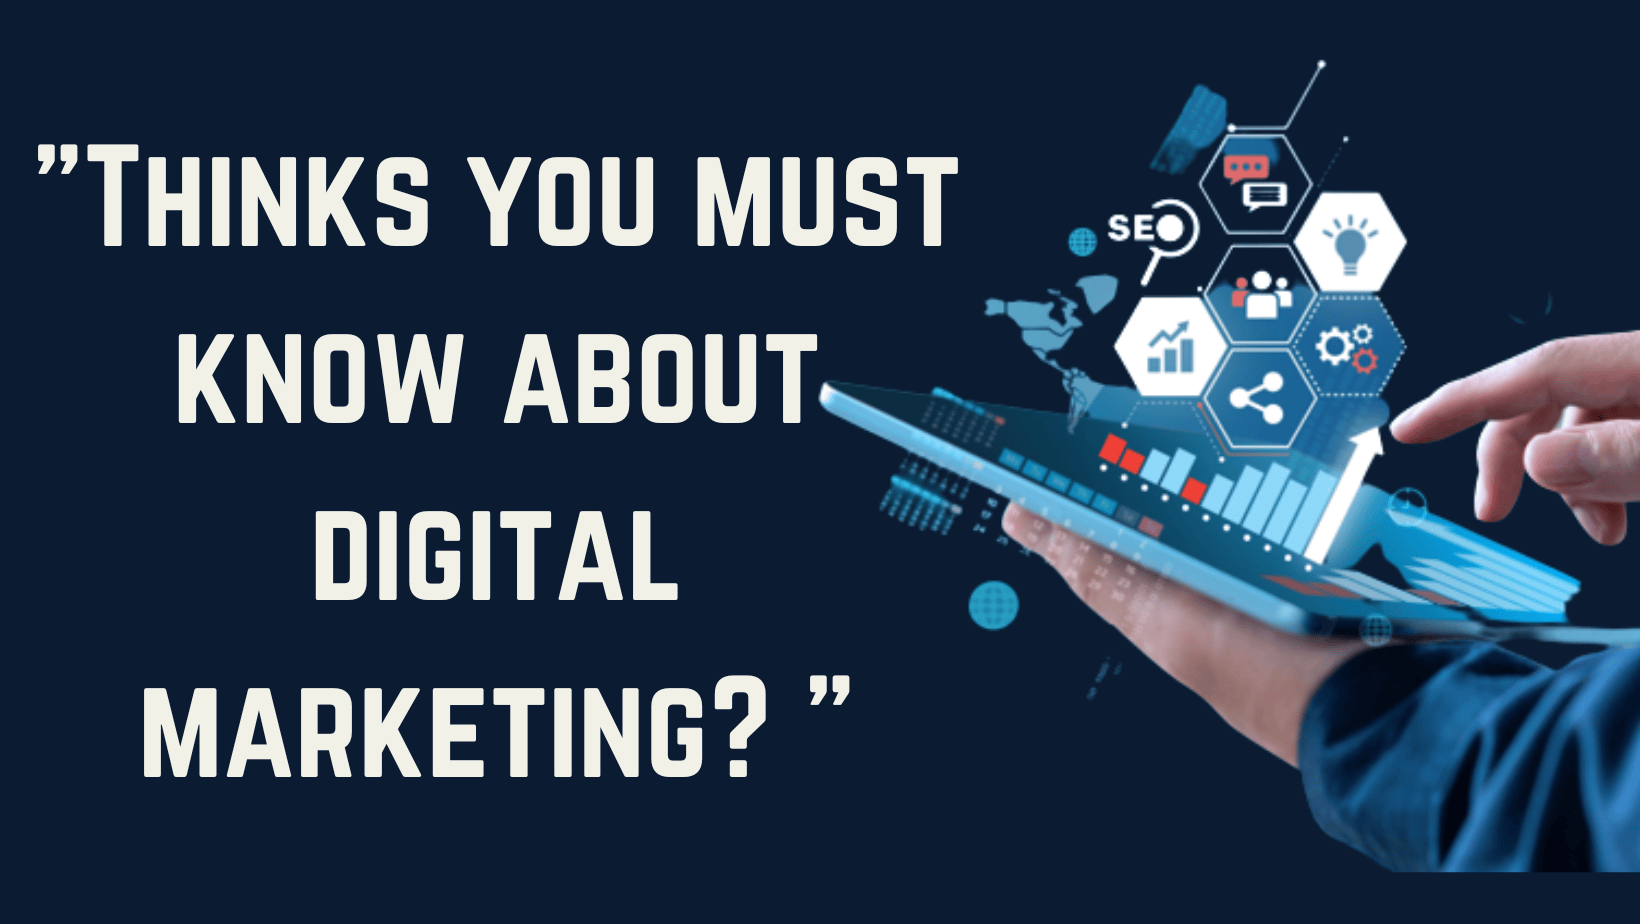 Some question about digital marketing for doctors